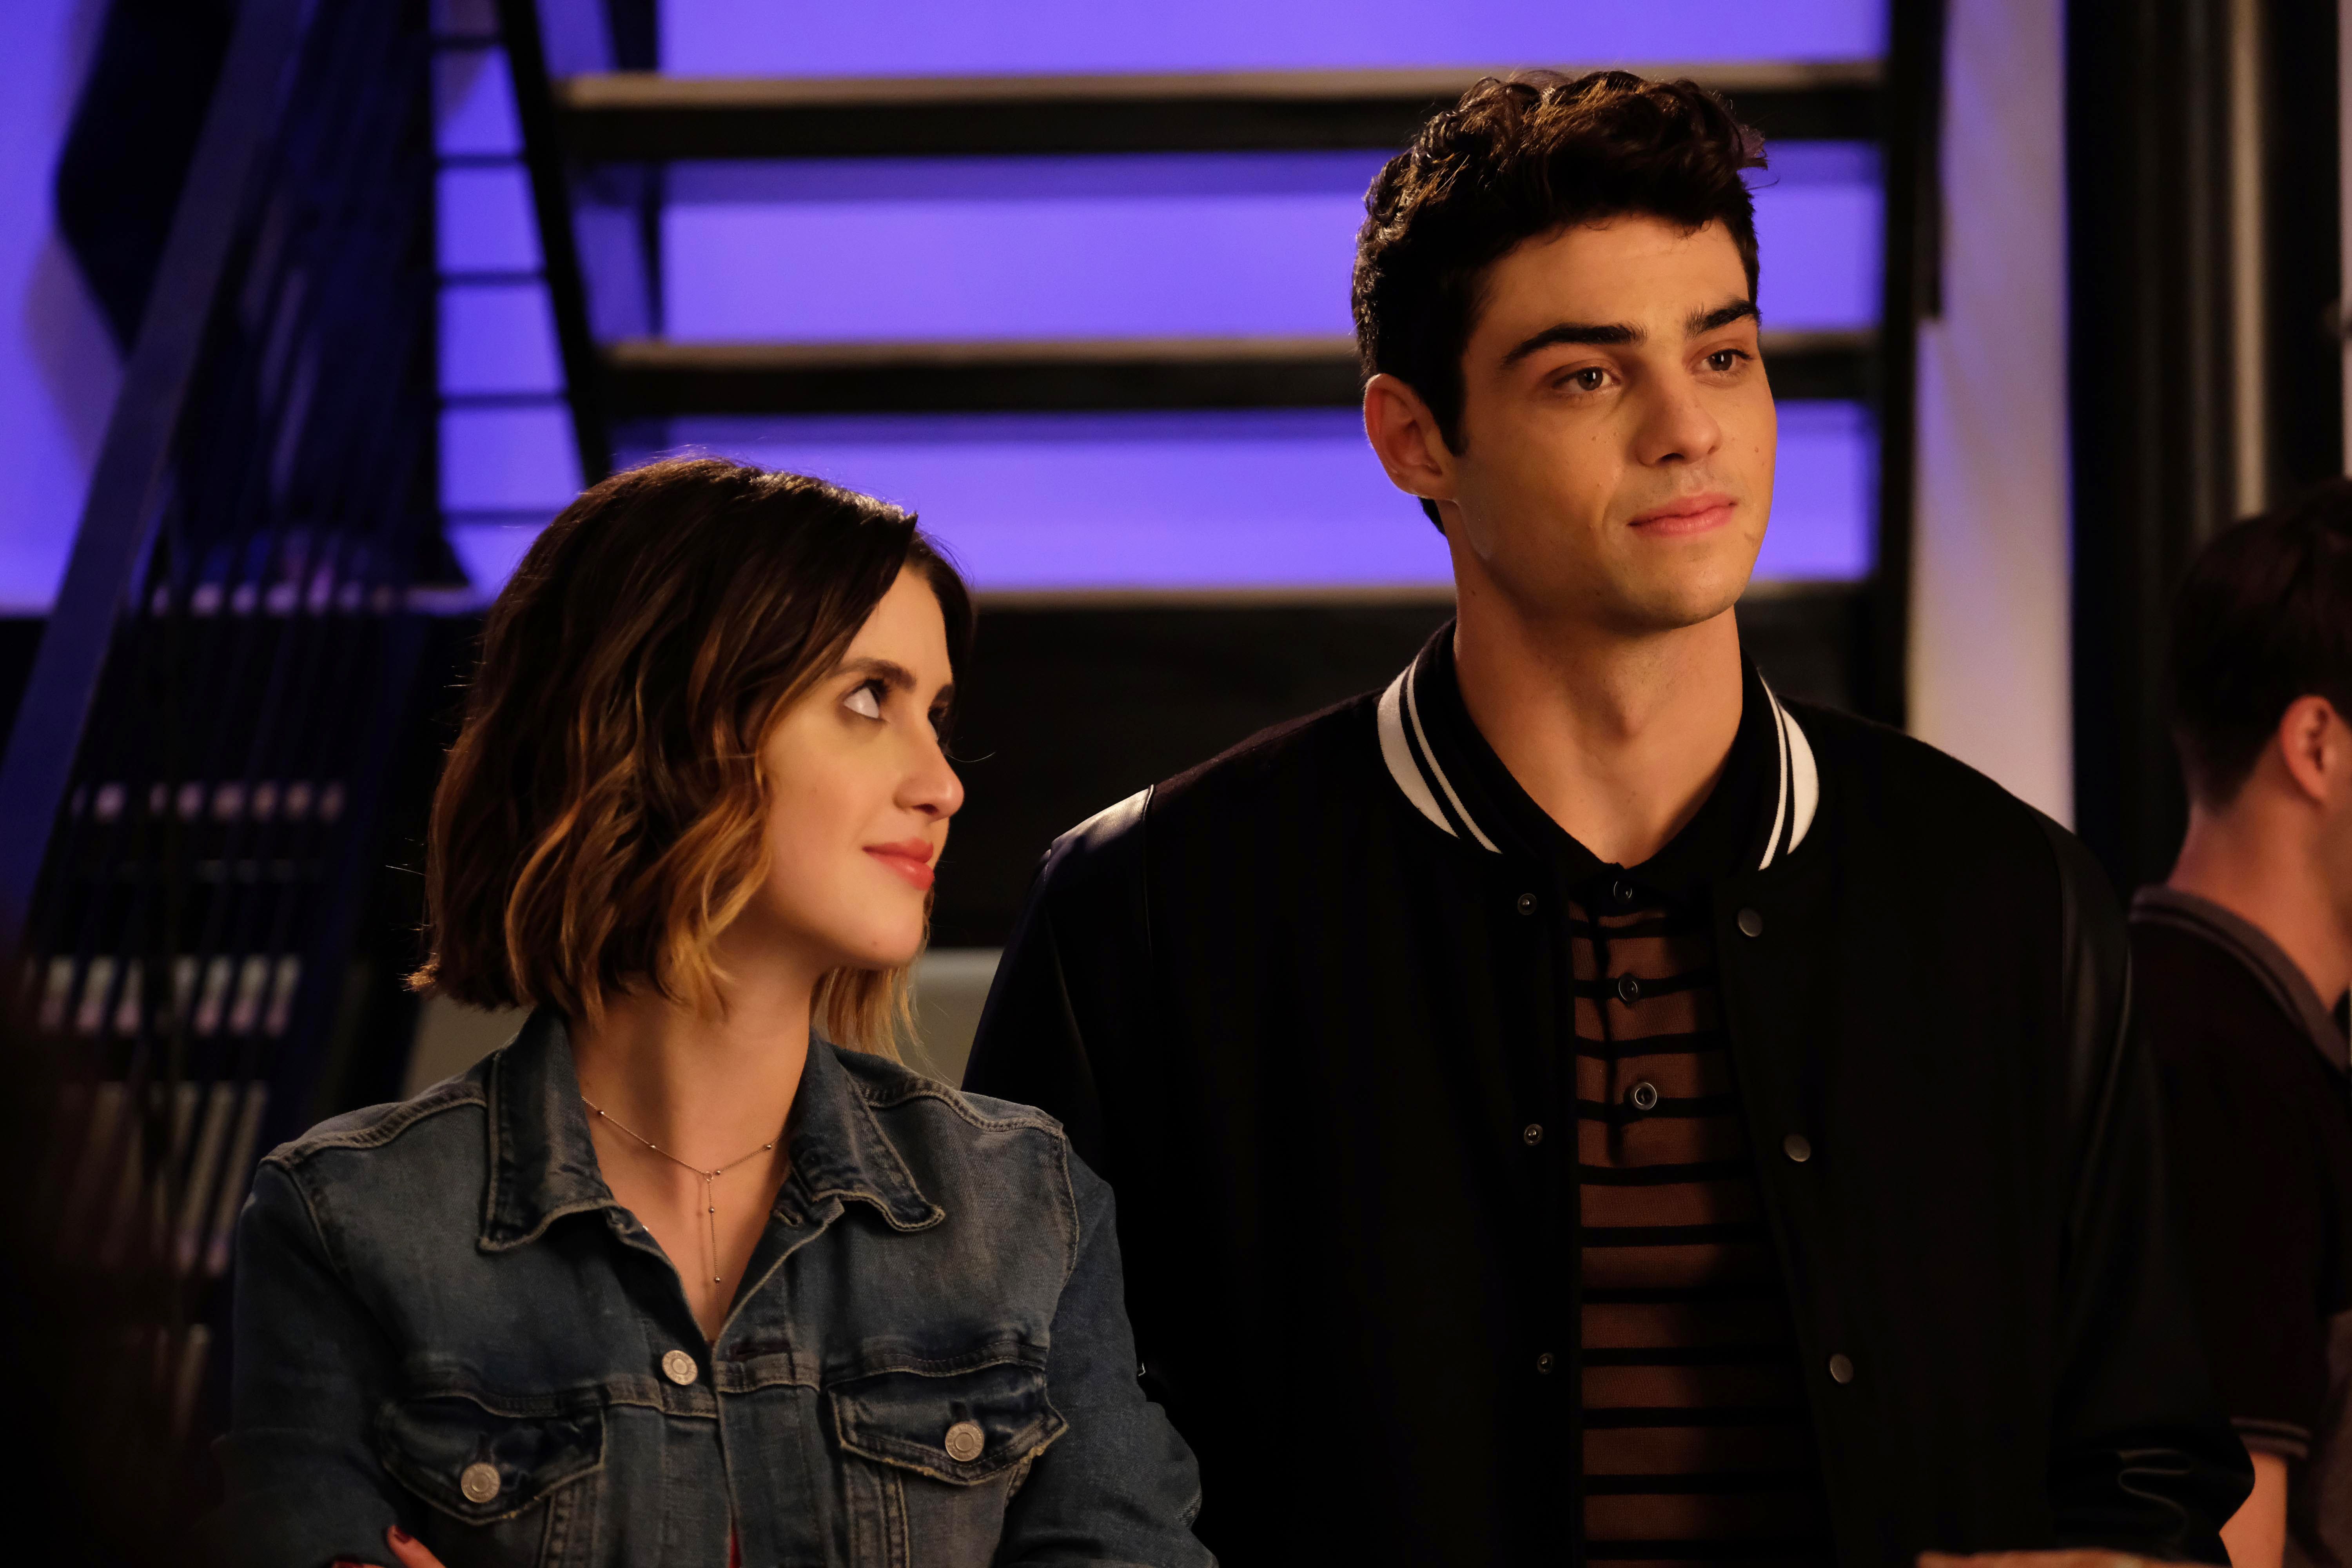 Laura Marano wears a beautiful jean jacket in The perfect Date while Reuniting with Noah Centineo